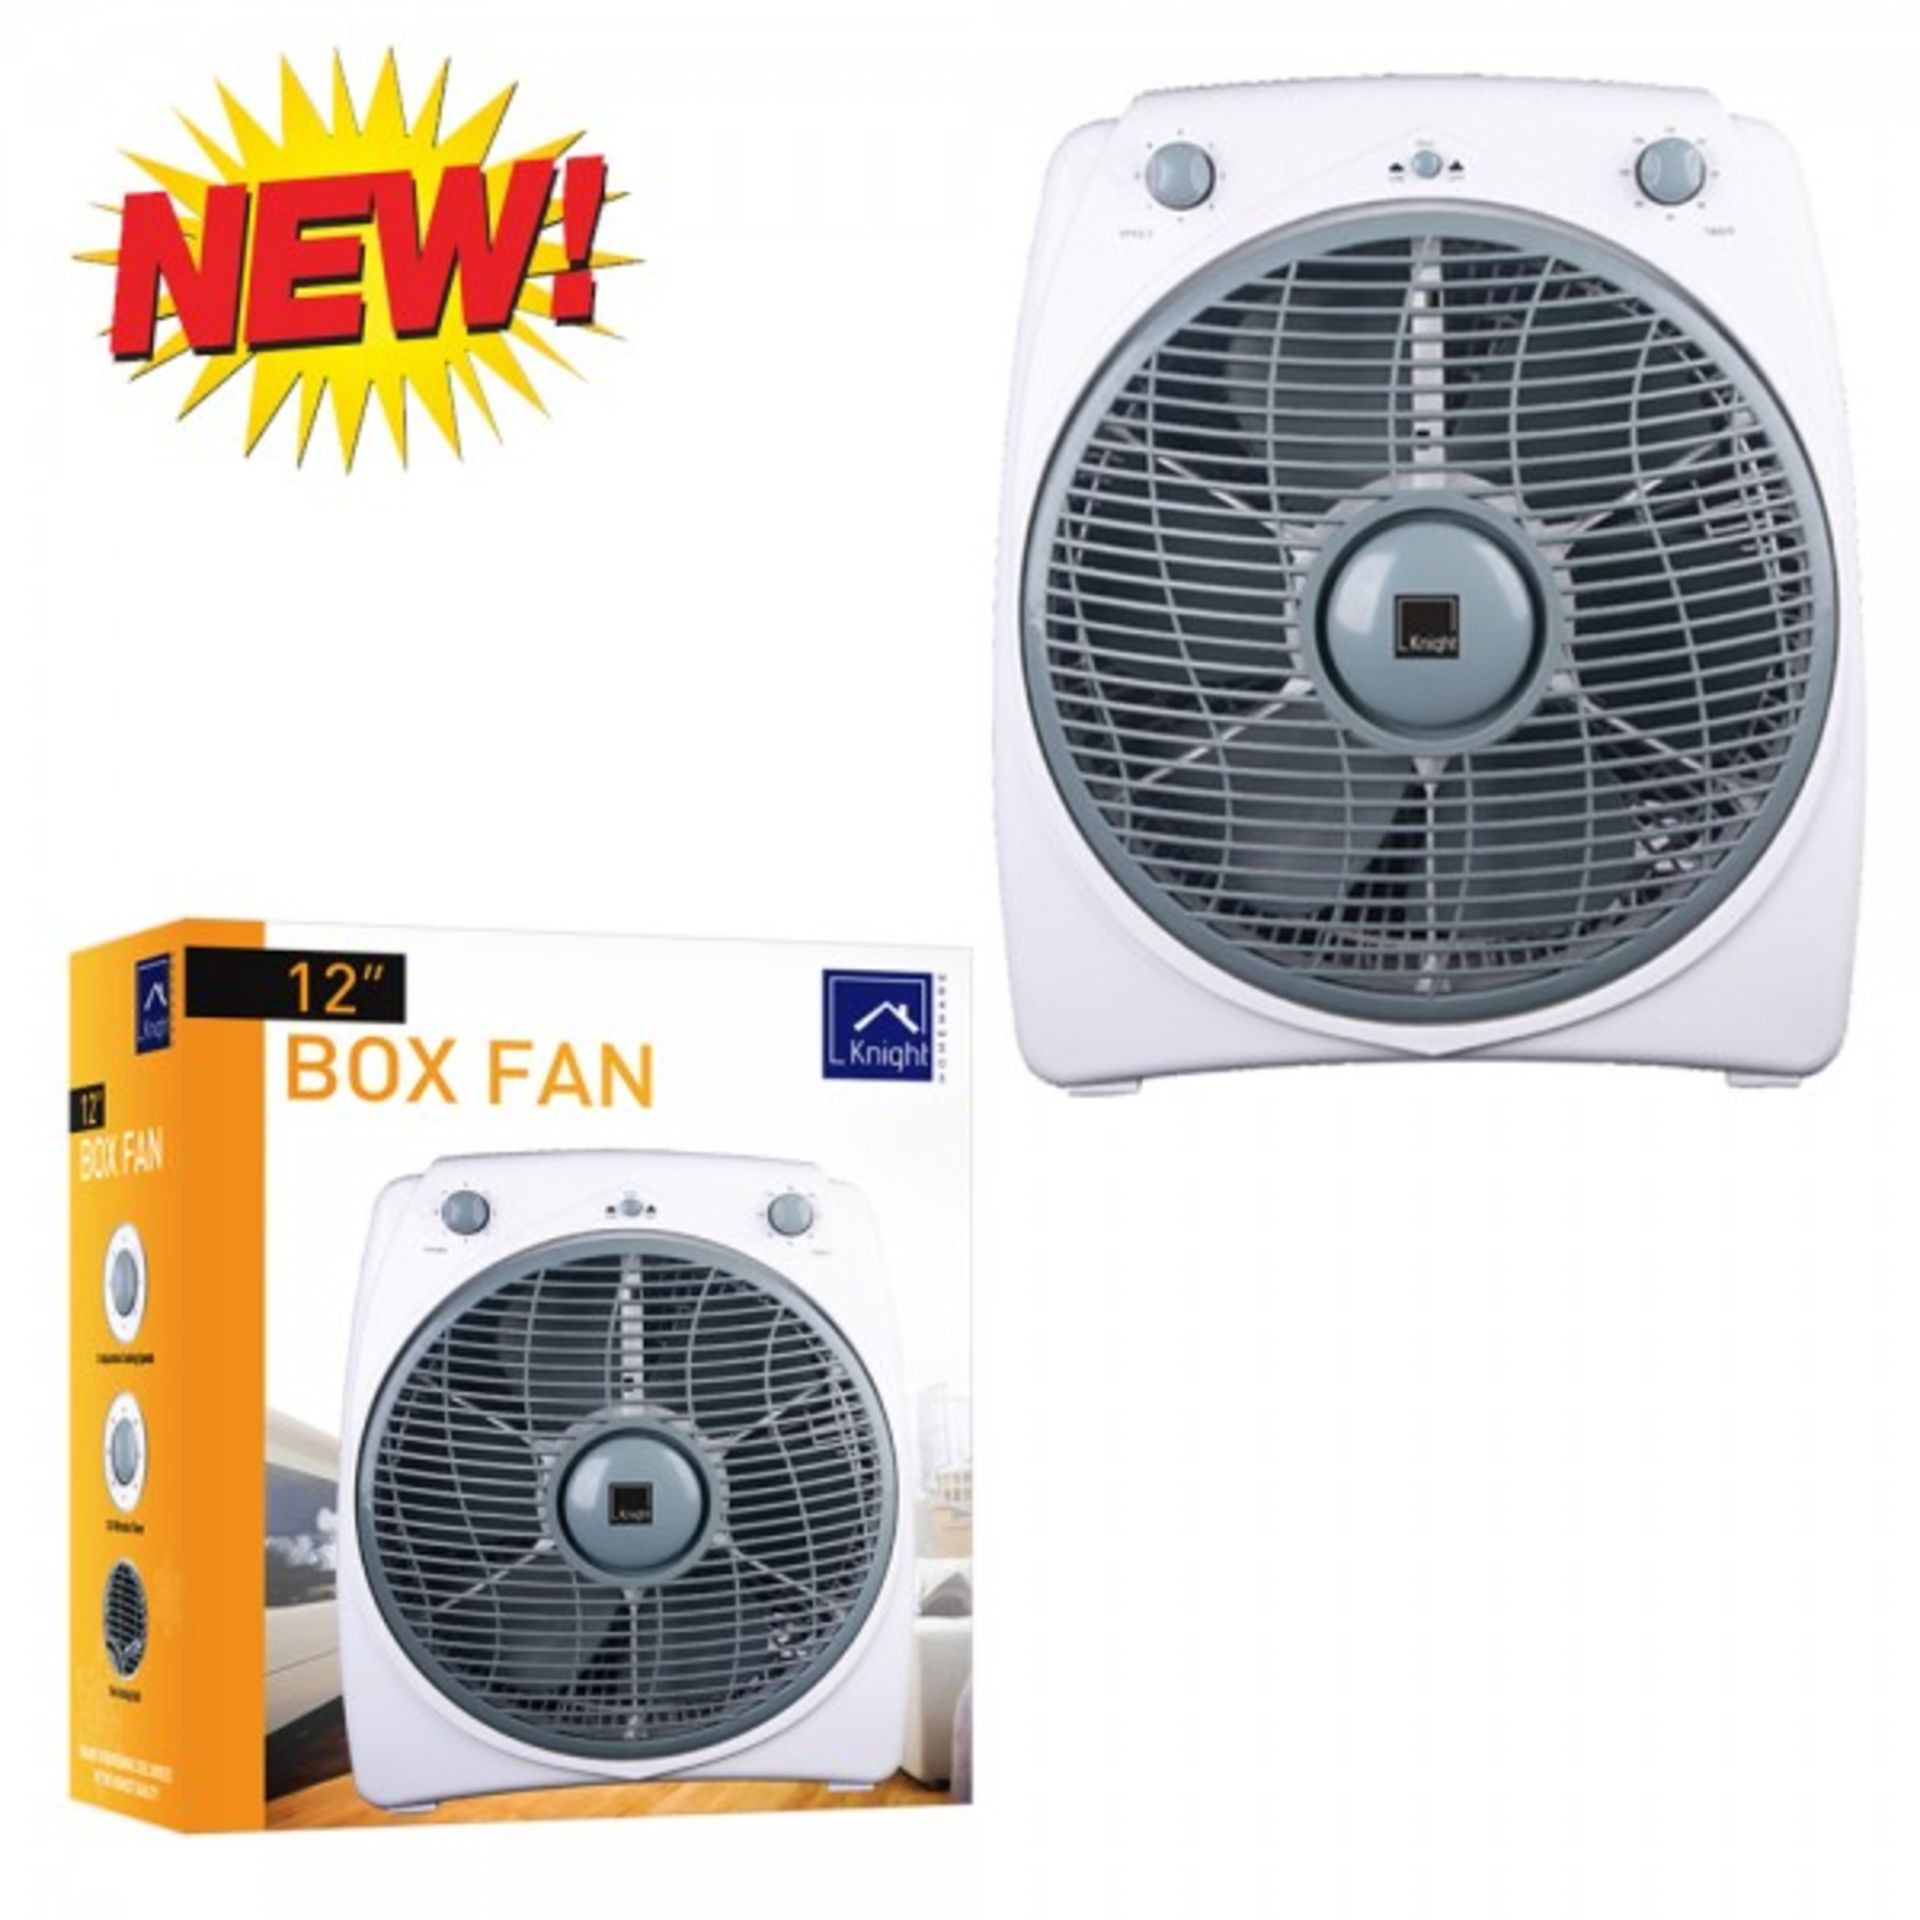 V Brand New 12" Box Fan - 3 Adjustable Cooling Speeds - 6 Blades - Rotary Moving Function - Anti